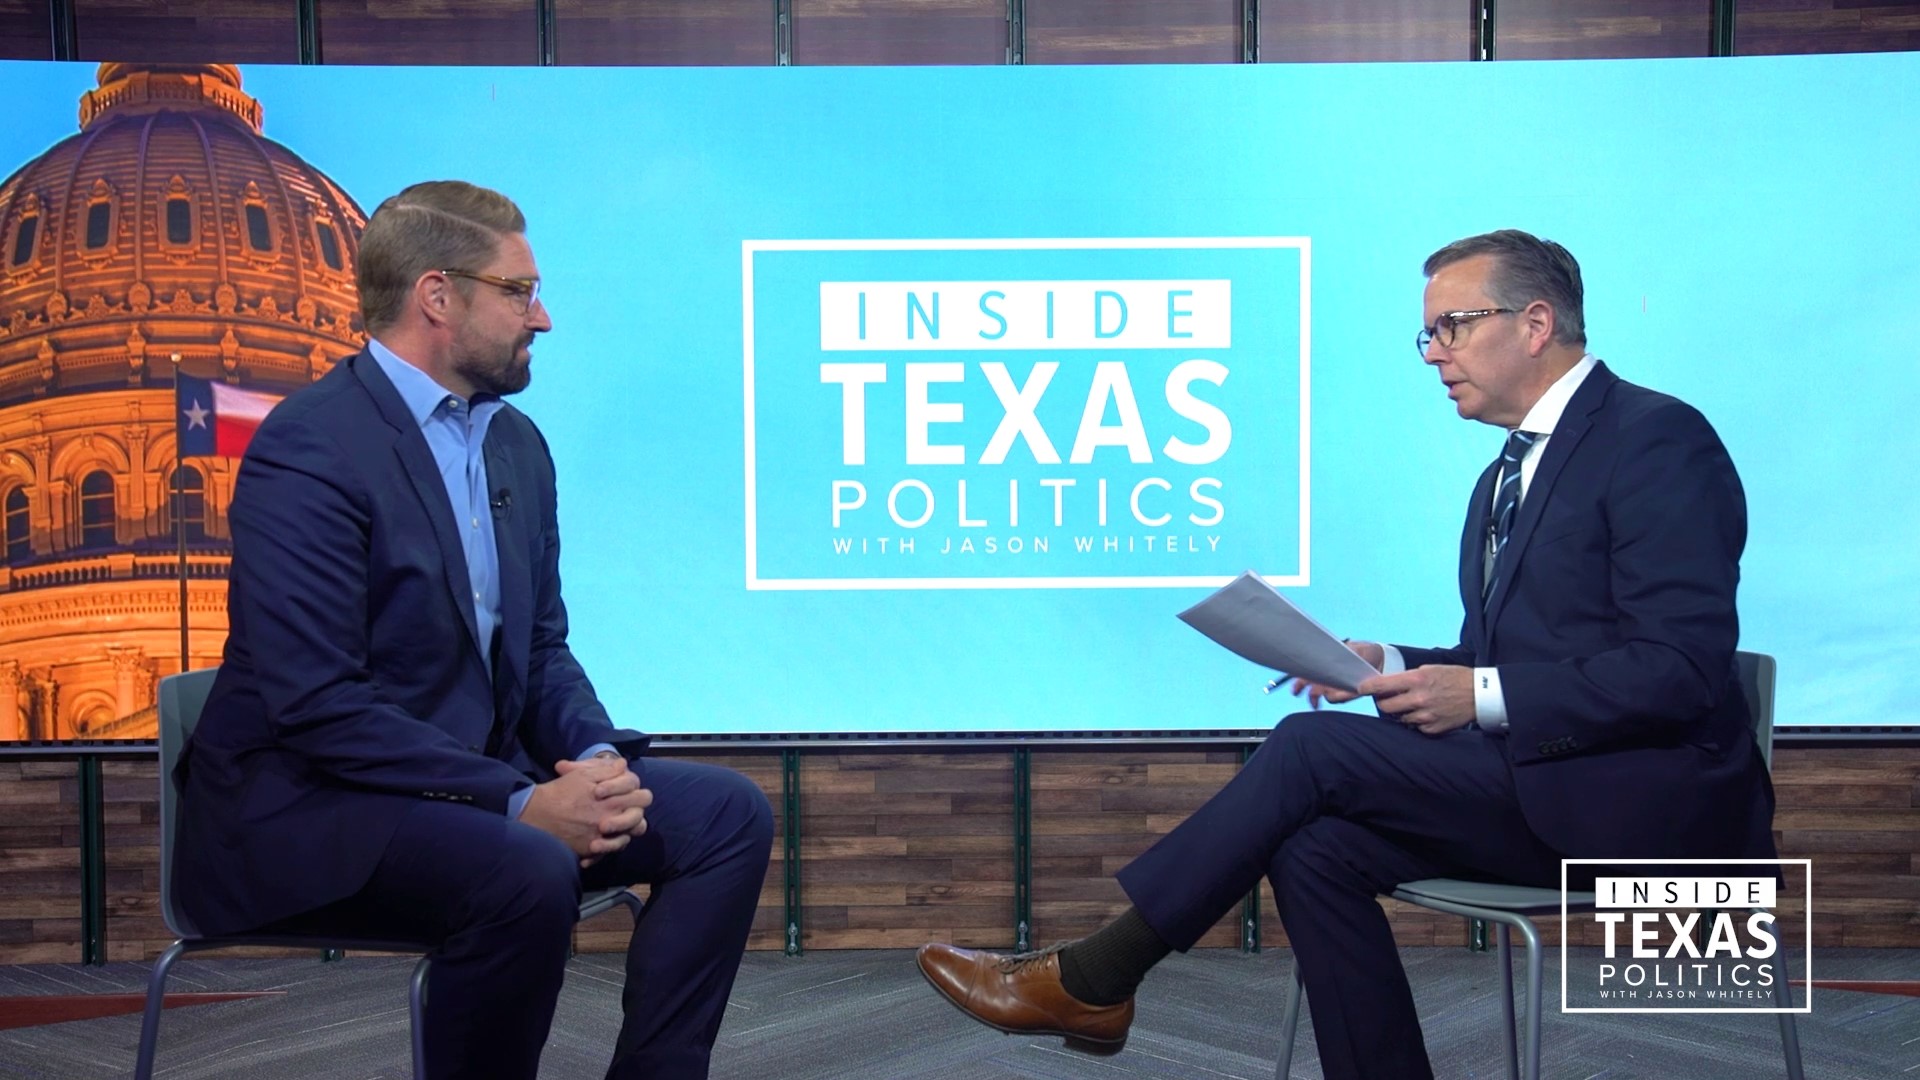 Rep. Jeff Leach also discusses primary challenge in the wake of Ken Paxton impeachment